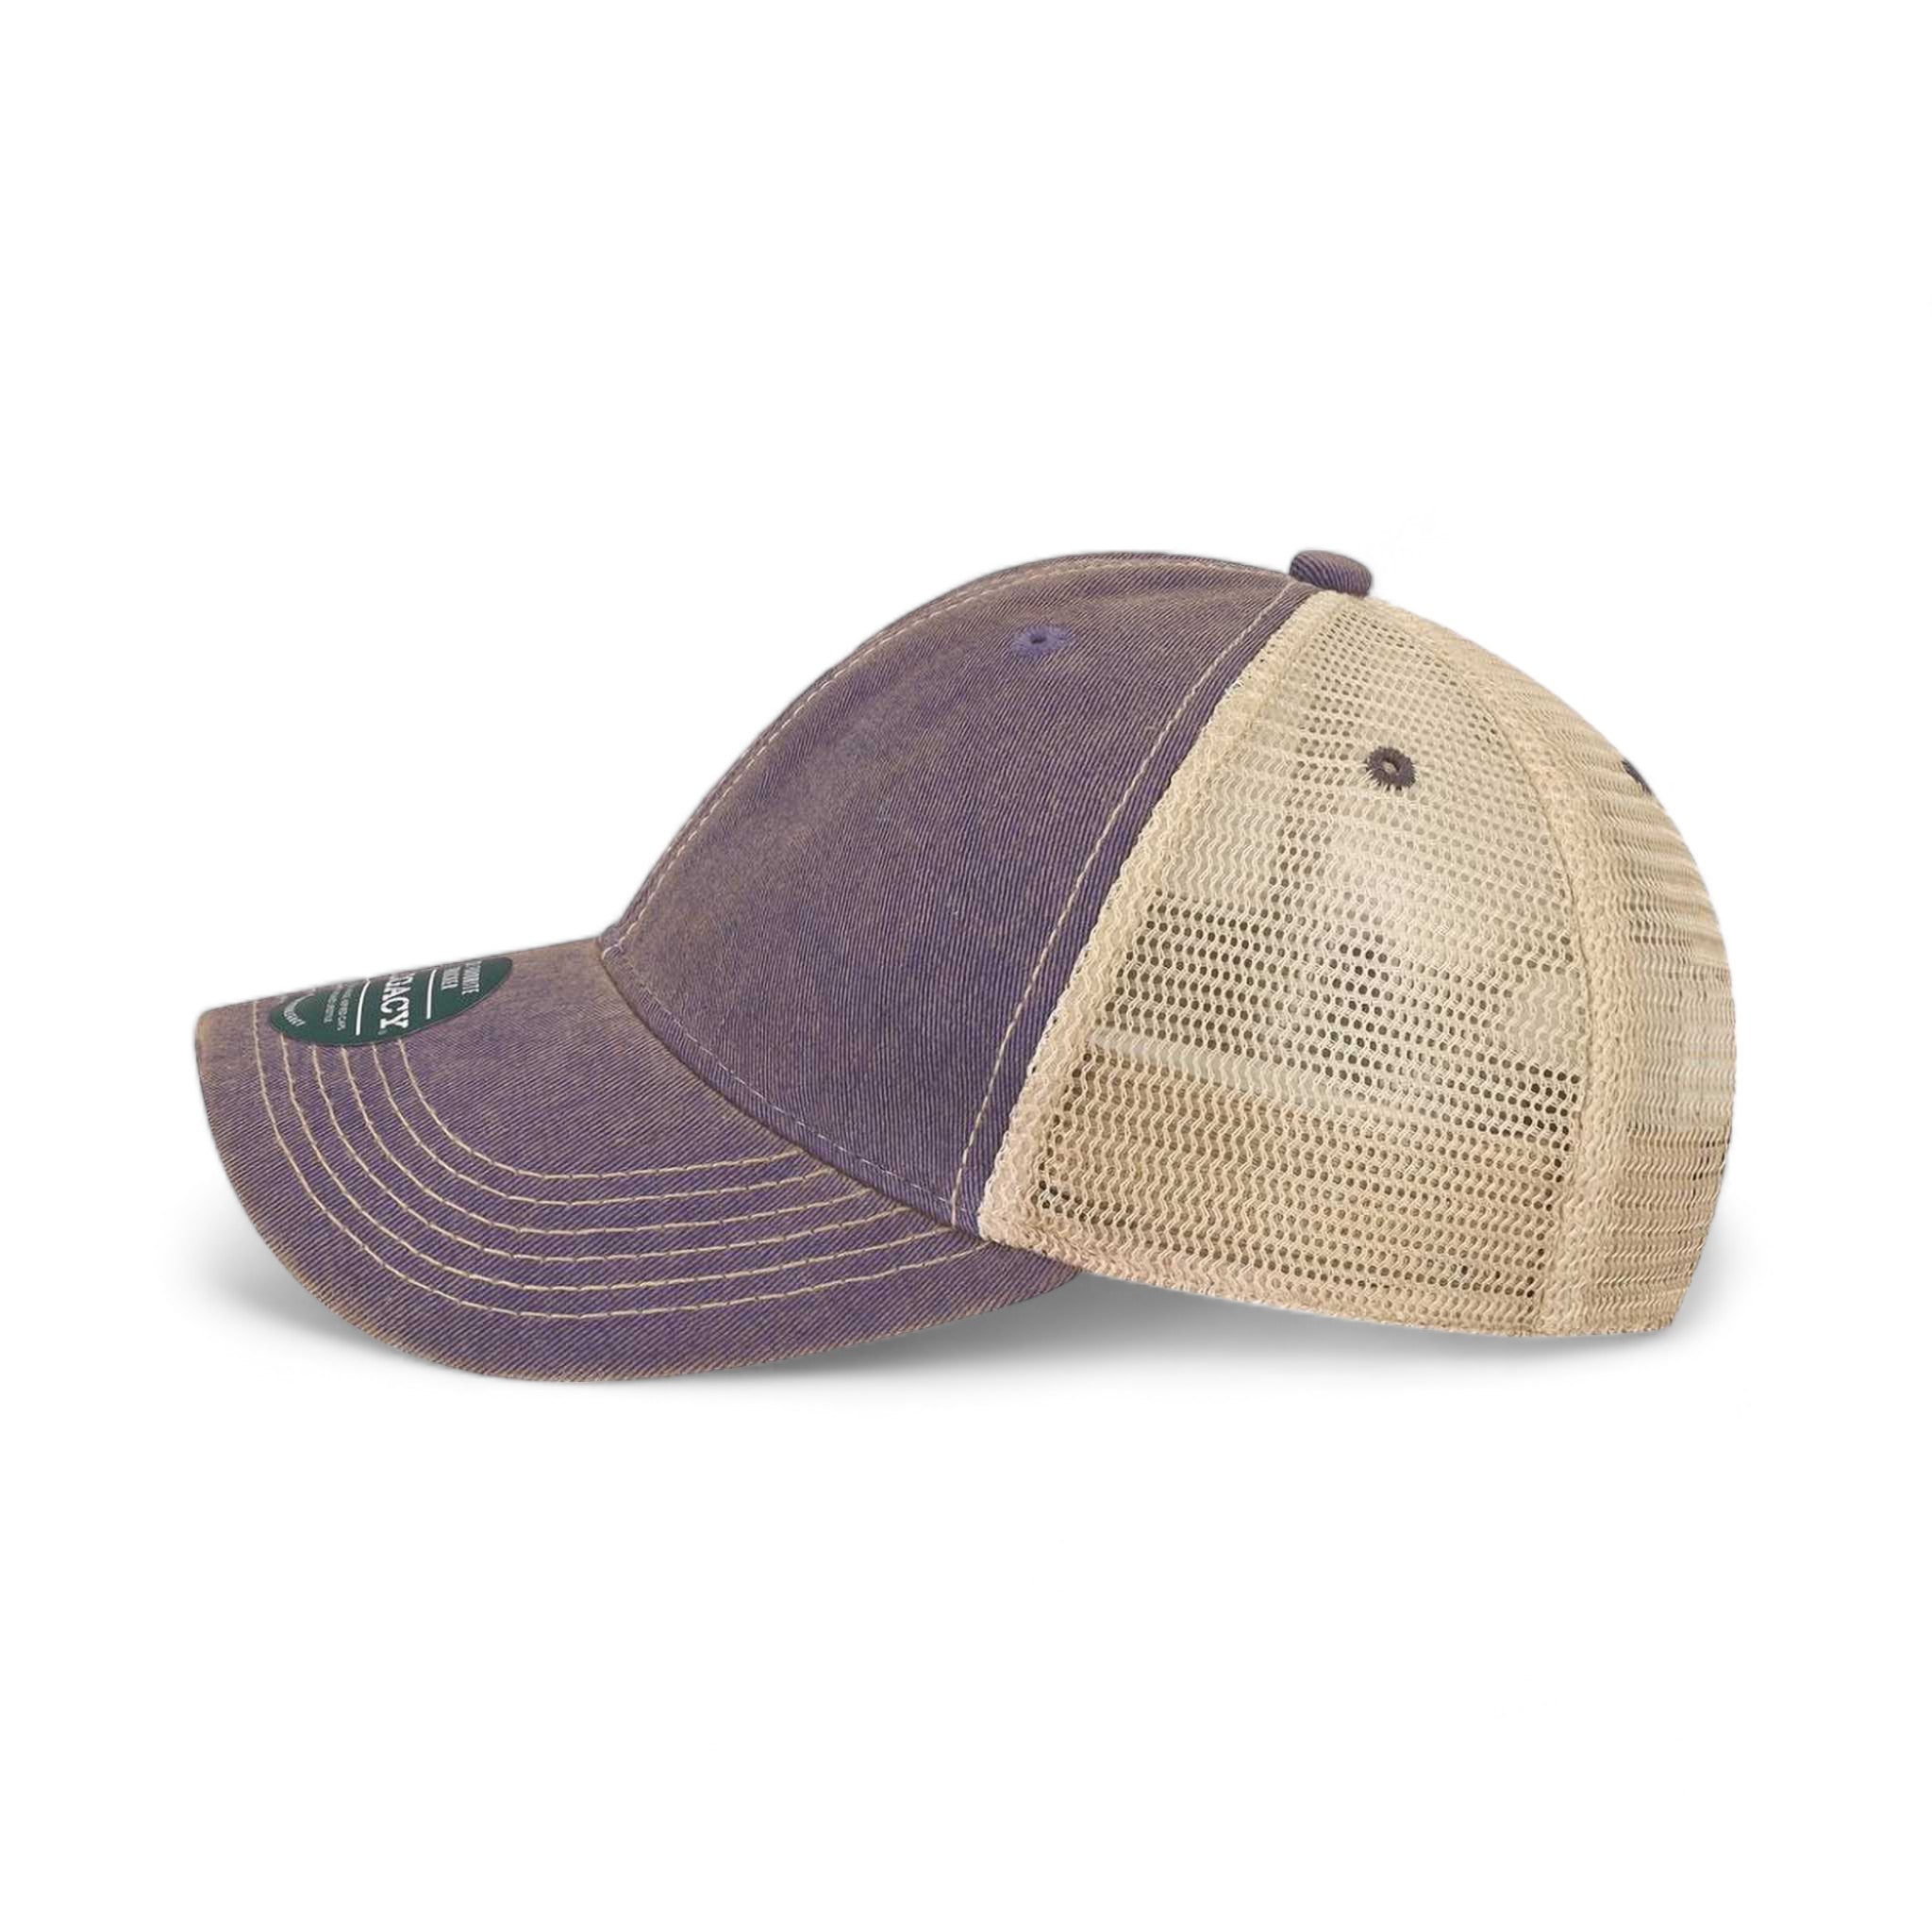 Side view of LEGACY OFAY custom hat in purple and khaki